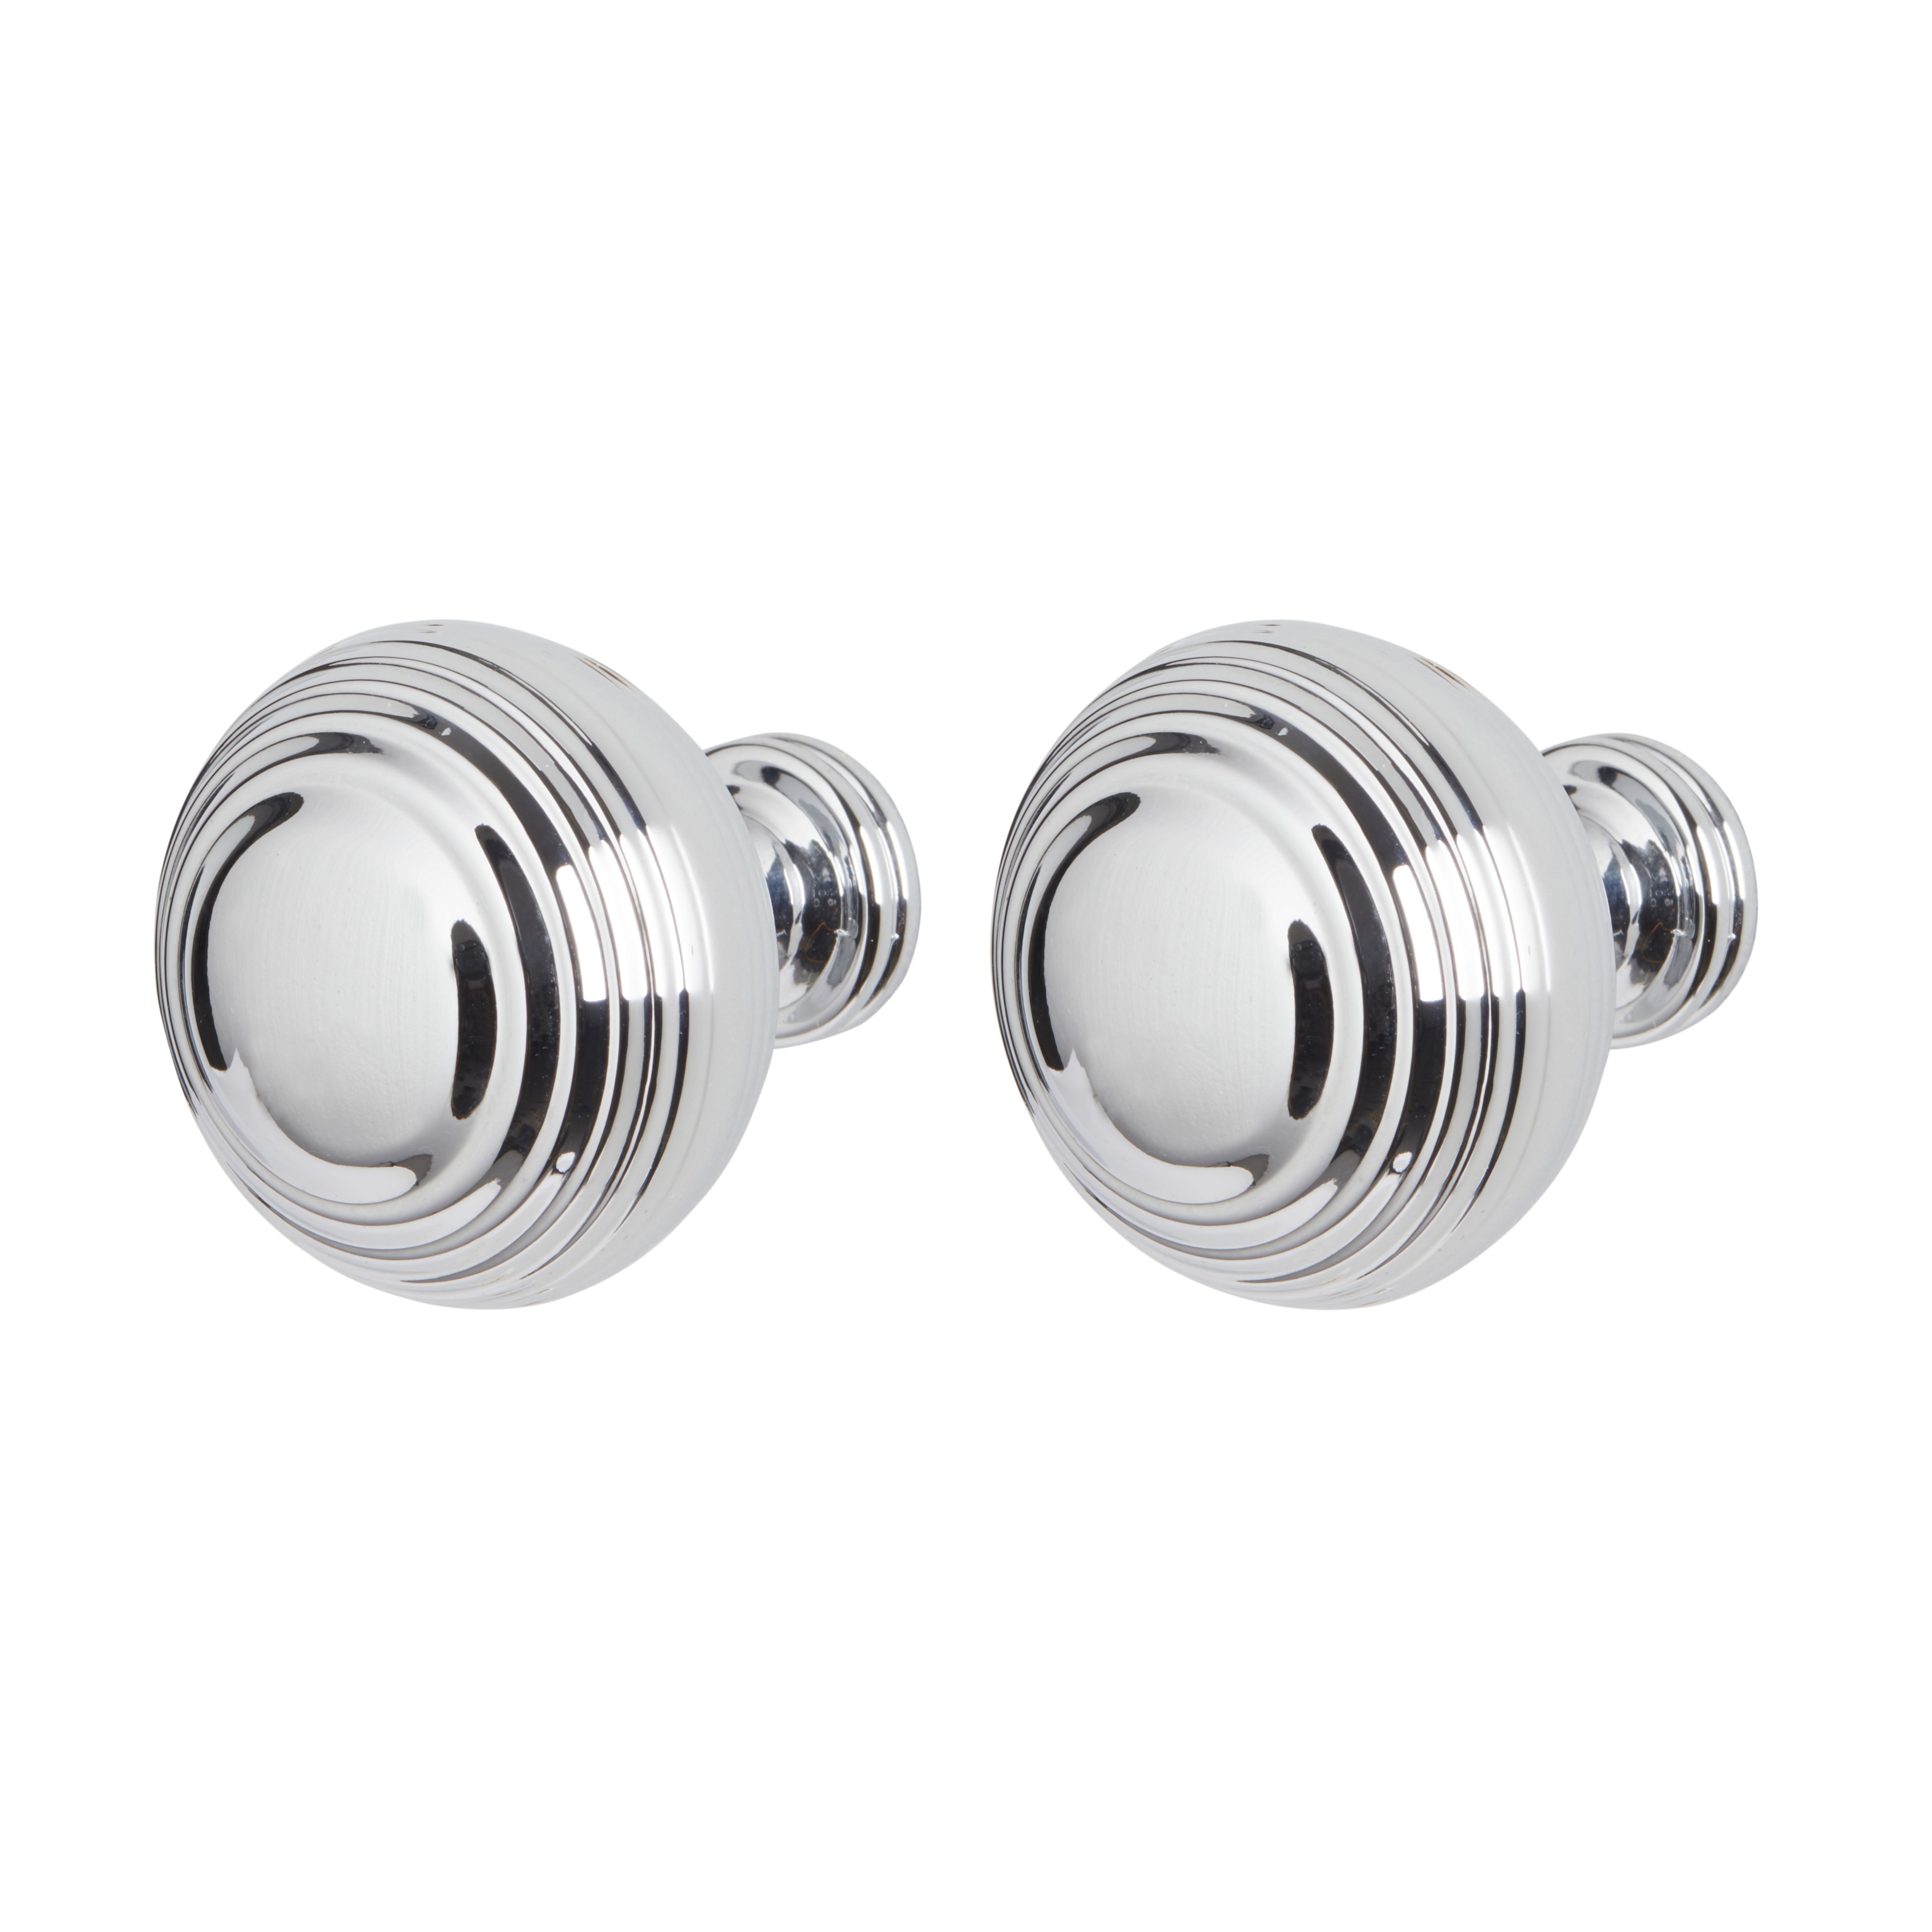 Goodhome Garni Polished Chrome Effect Round Kitchen Cabinets Handle L 32mm H 32mm Pack Of 2~3663602475491 01c?$MOB PREV$&$width=768&$height=768